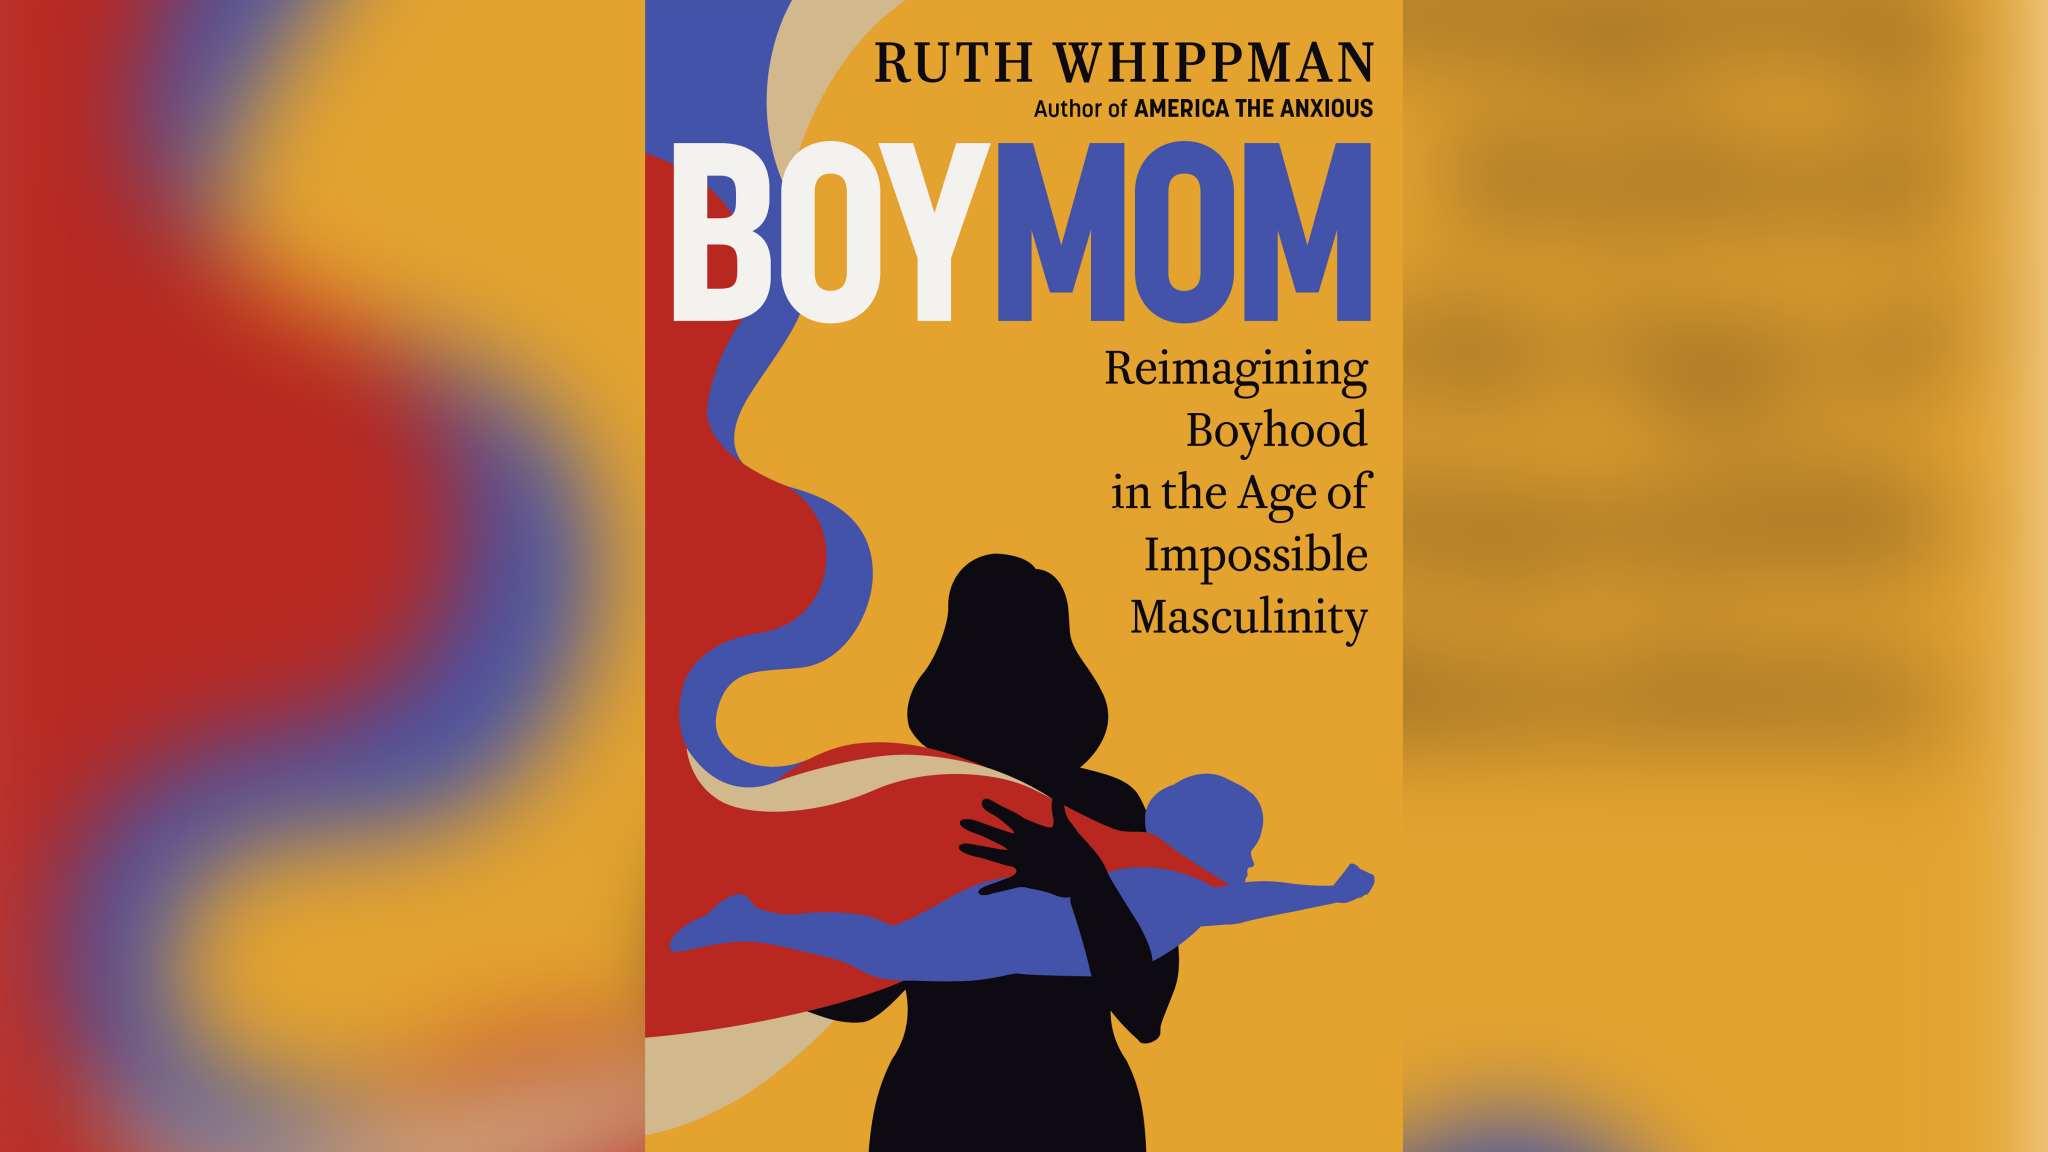 “Boymom: Reimagining Boyhood in the age of impossible masculinity" by Ruth Whippman.